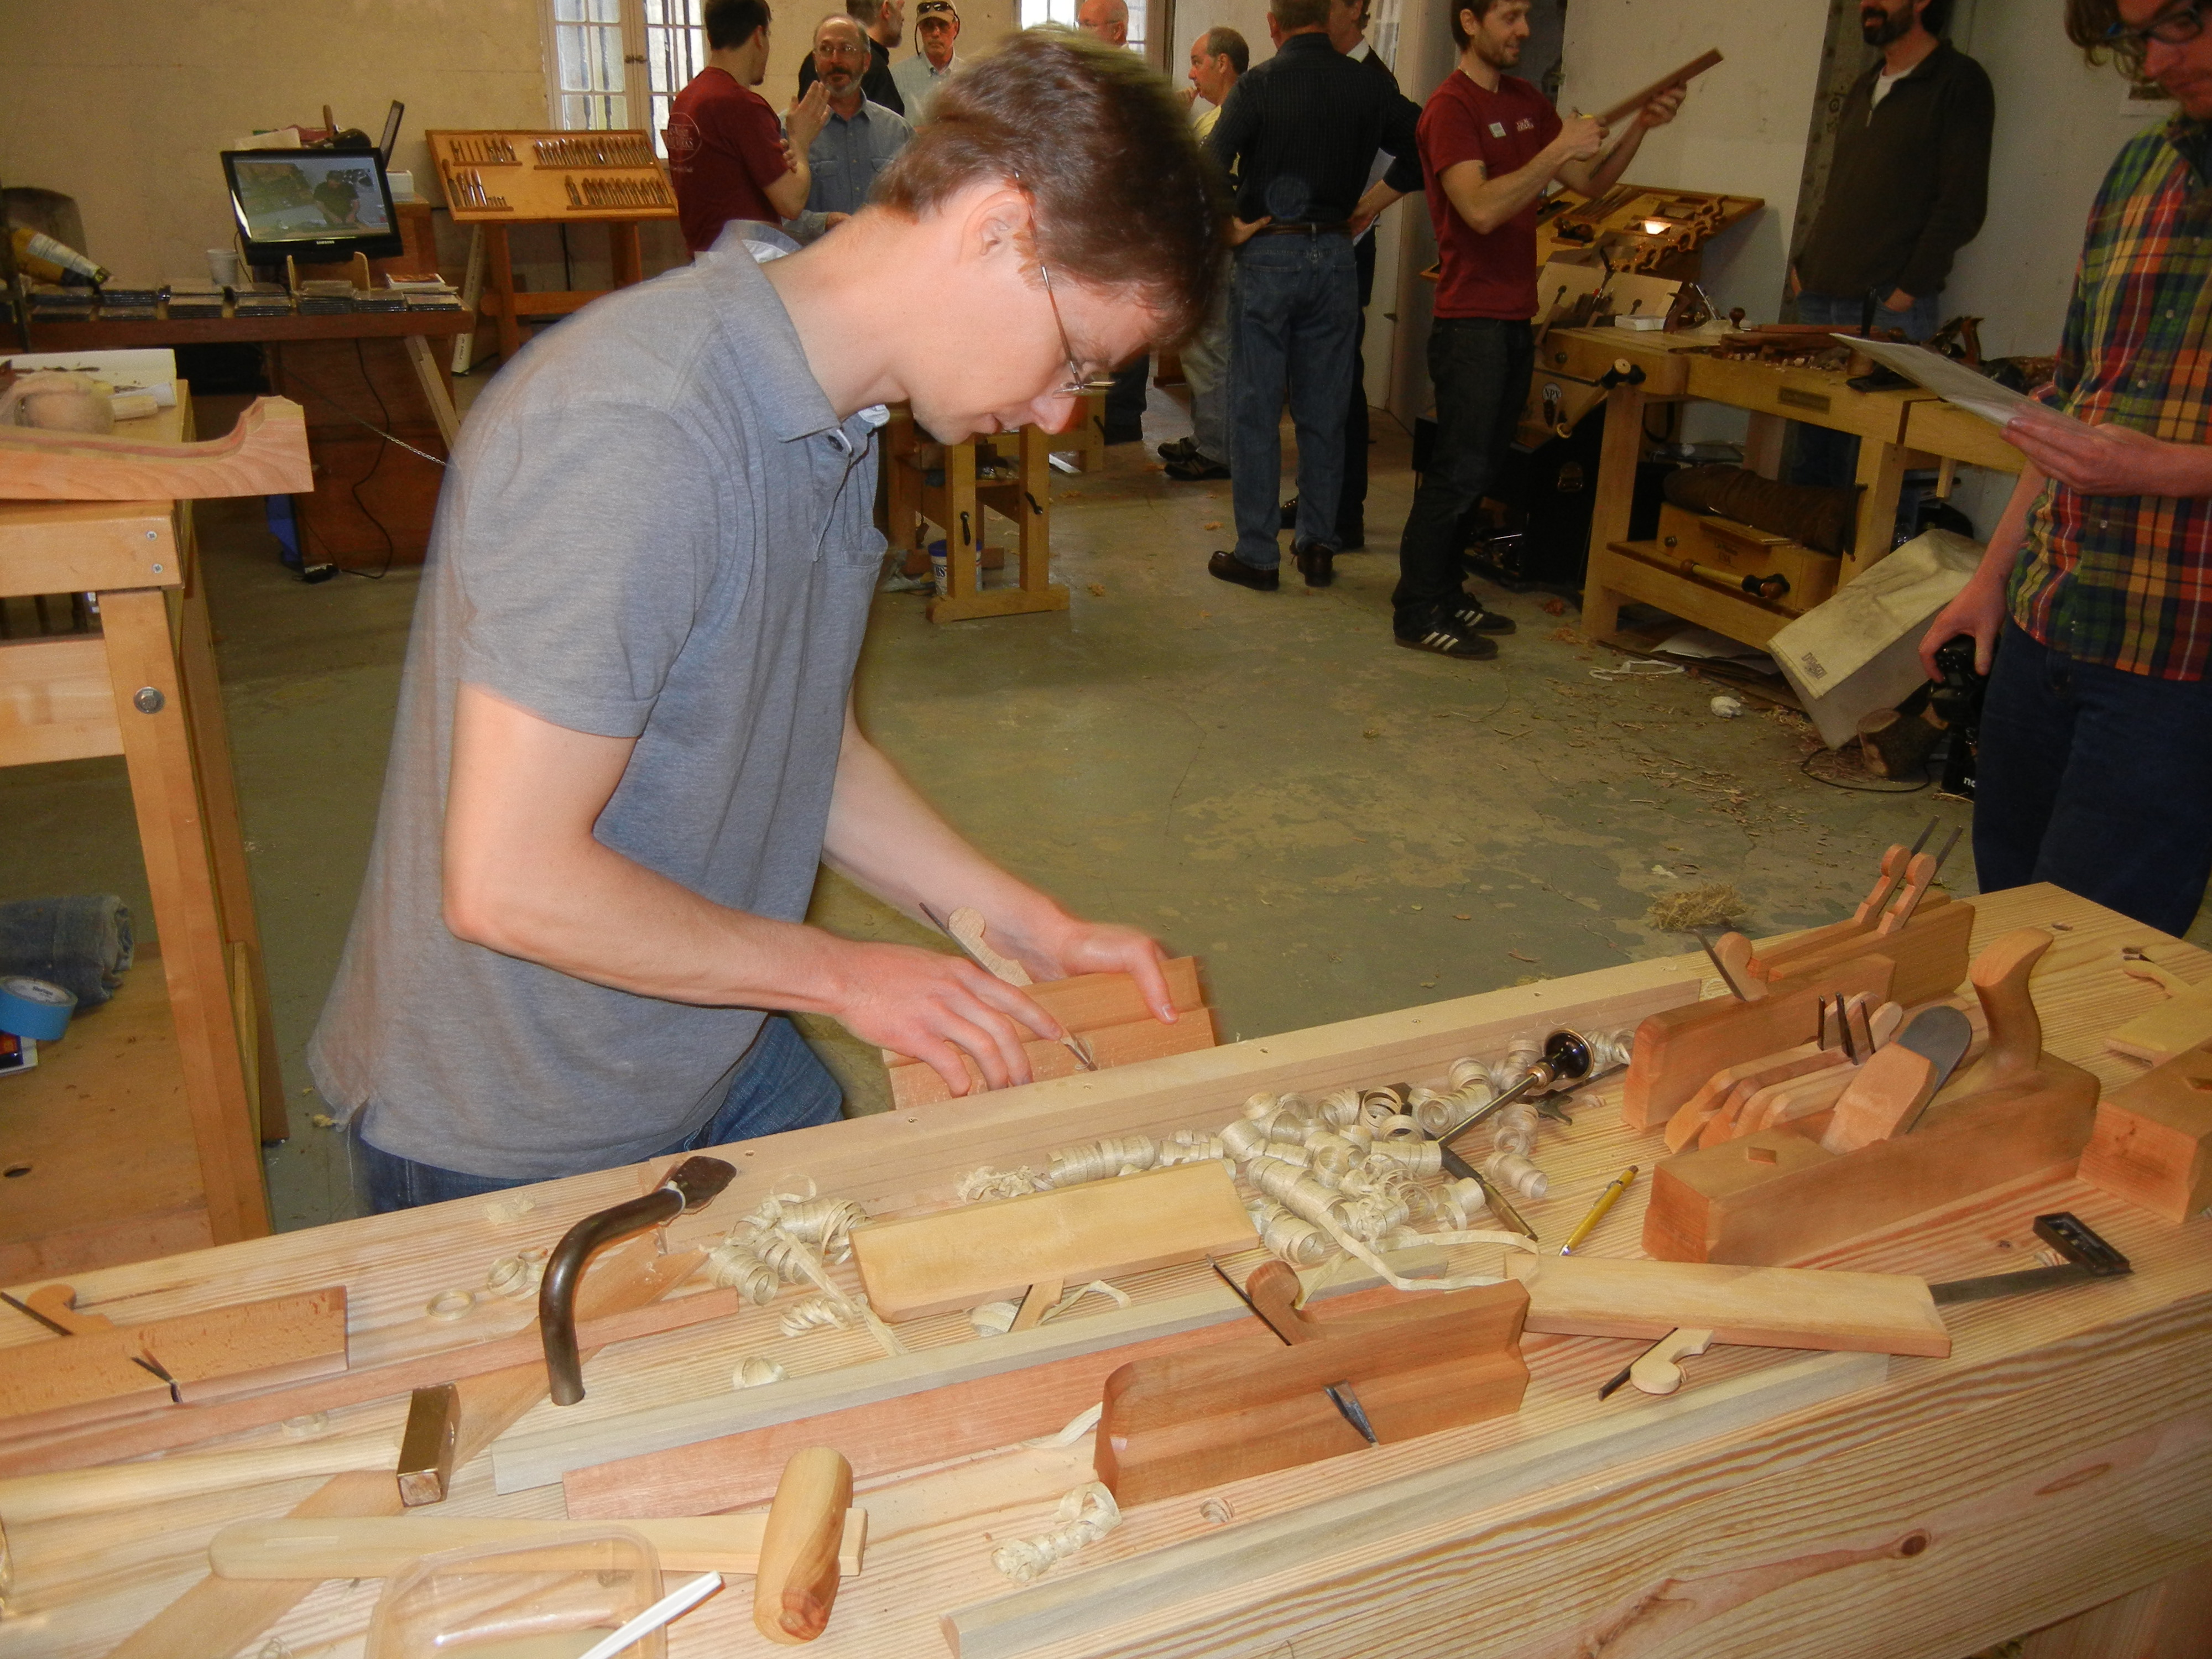 Weekend Festival of Woodworking Fun - Mary May - Woodcarver